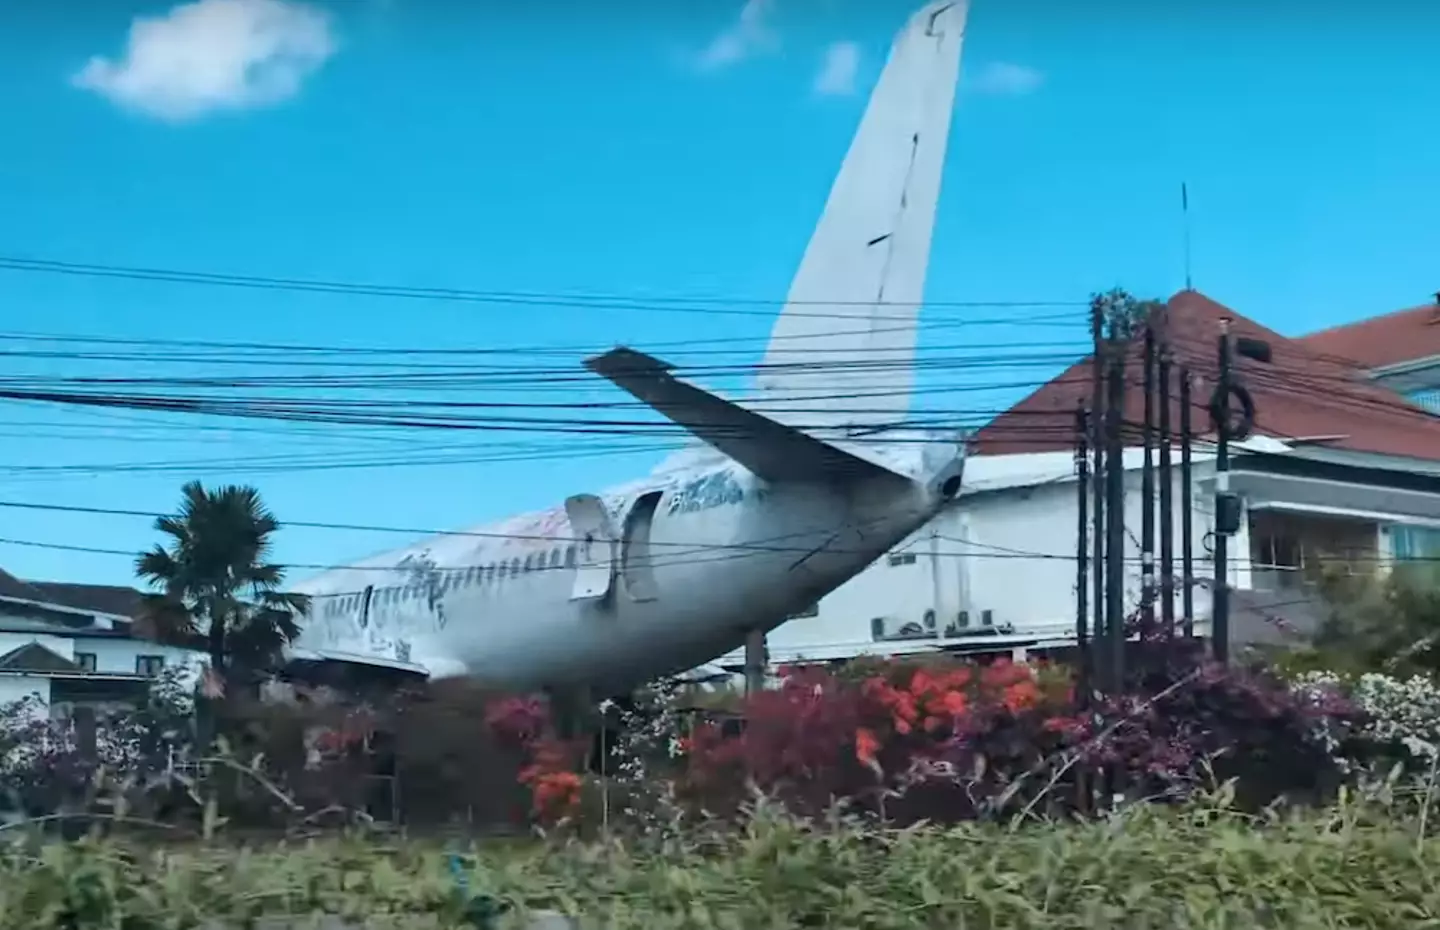 Bali is home to a second abandoned Boeing 737.